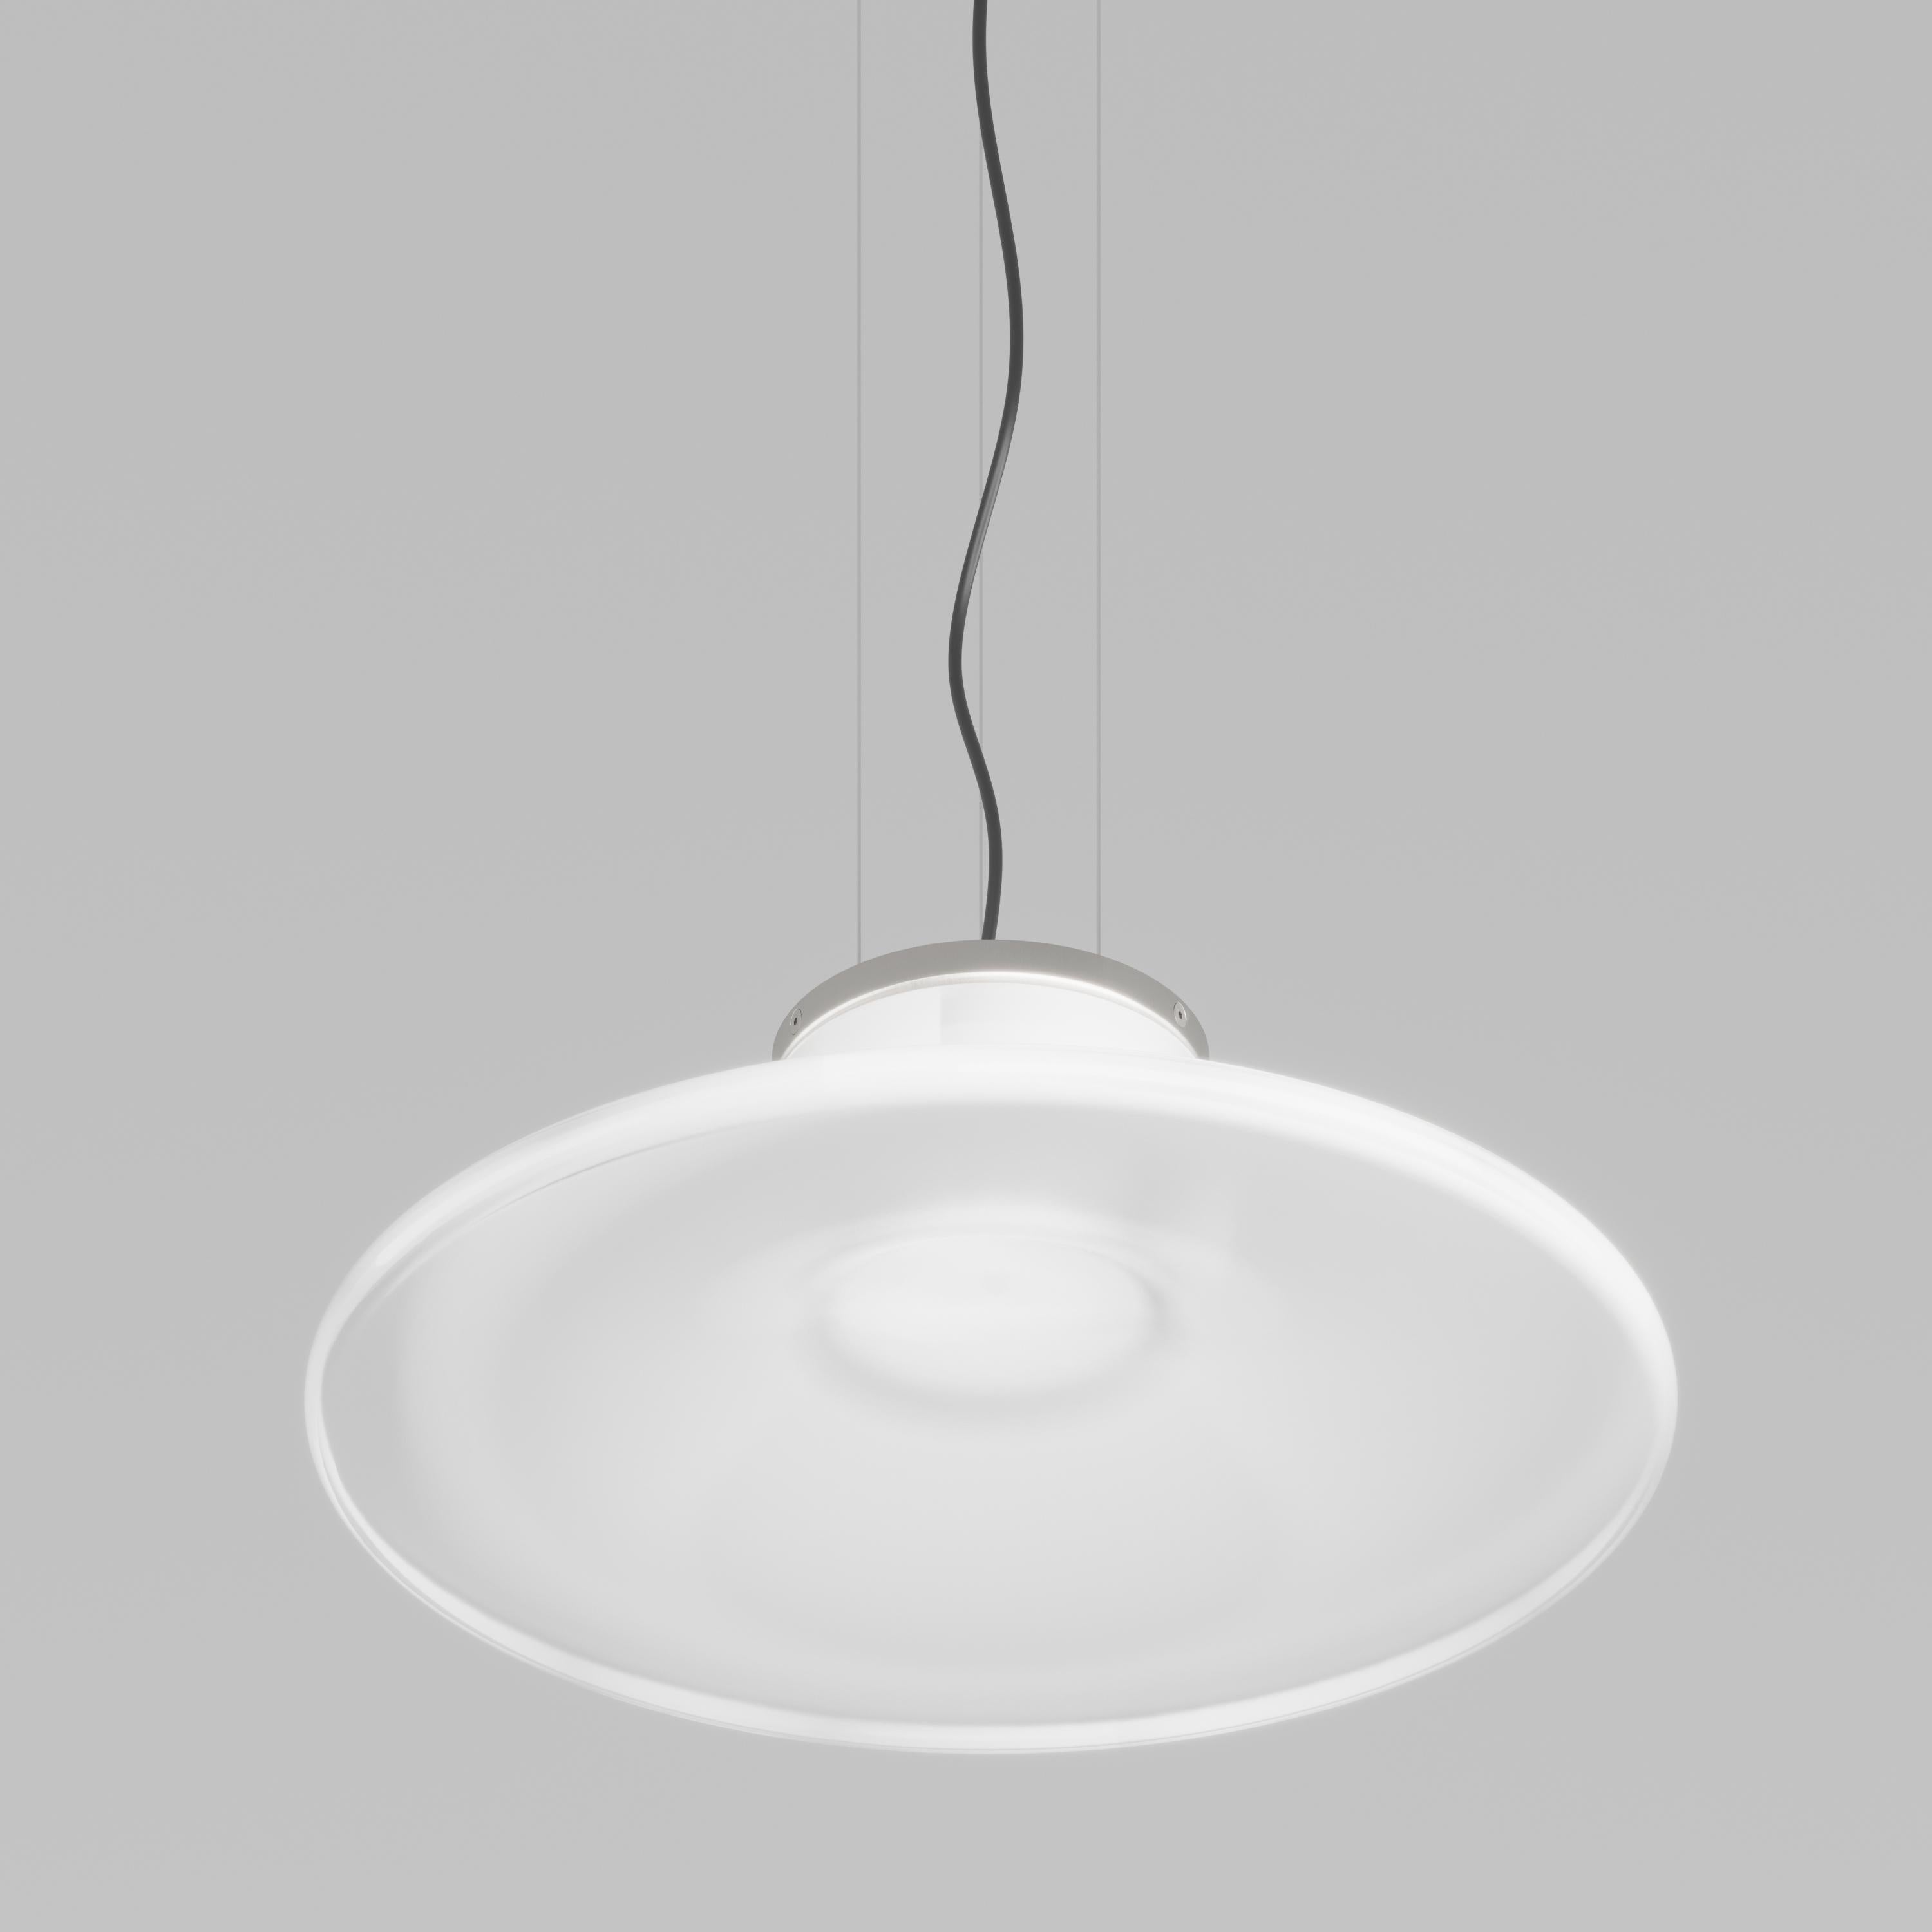 White crystal corollas. The stem develops thinly and then opens up in a mouth with crystal profiles. The LED source lights up the white shaded glass of the suspension and ceiling lamp versions. Neutral tones and simple, elegant lines make it